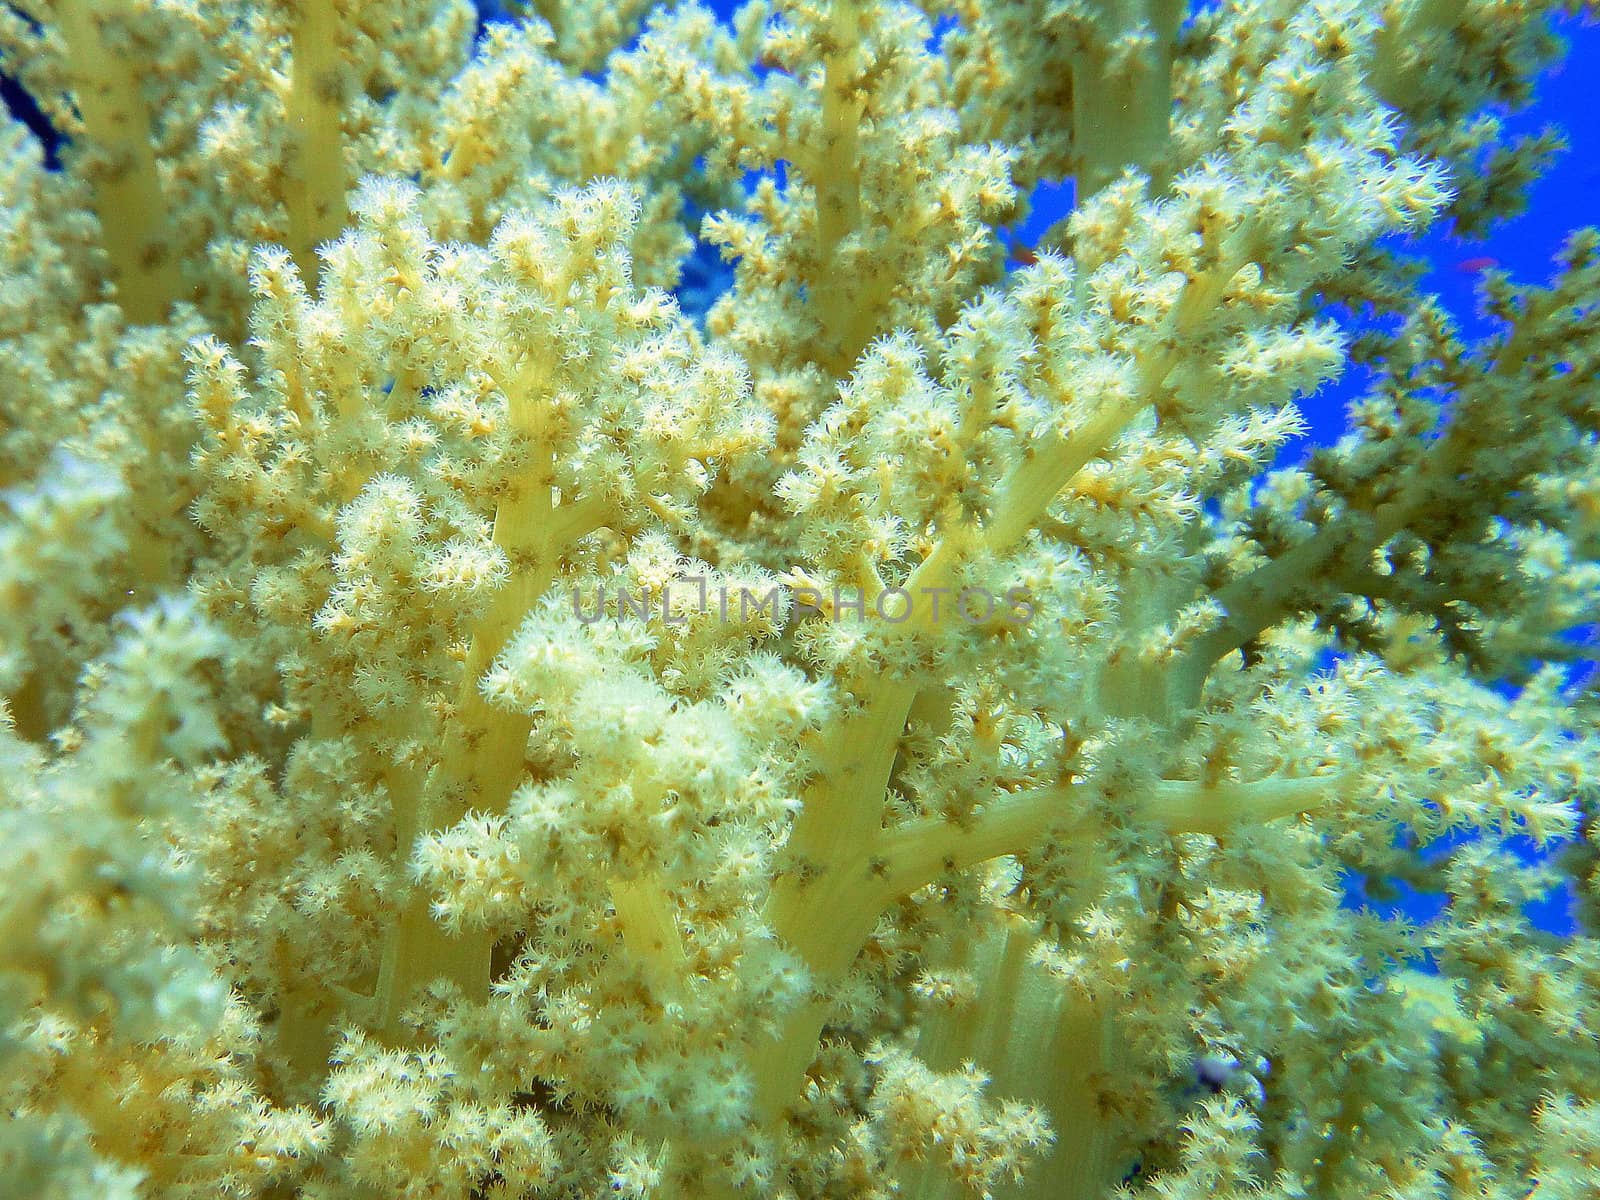 Soft coral 4 by georg777